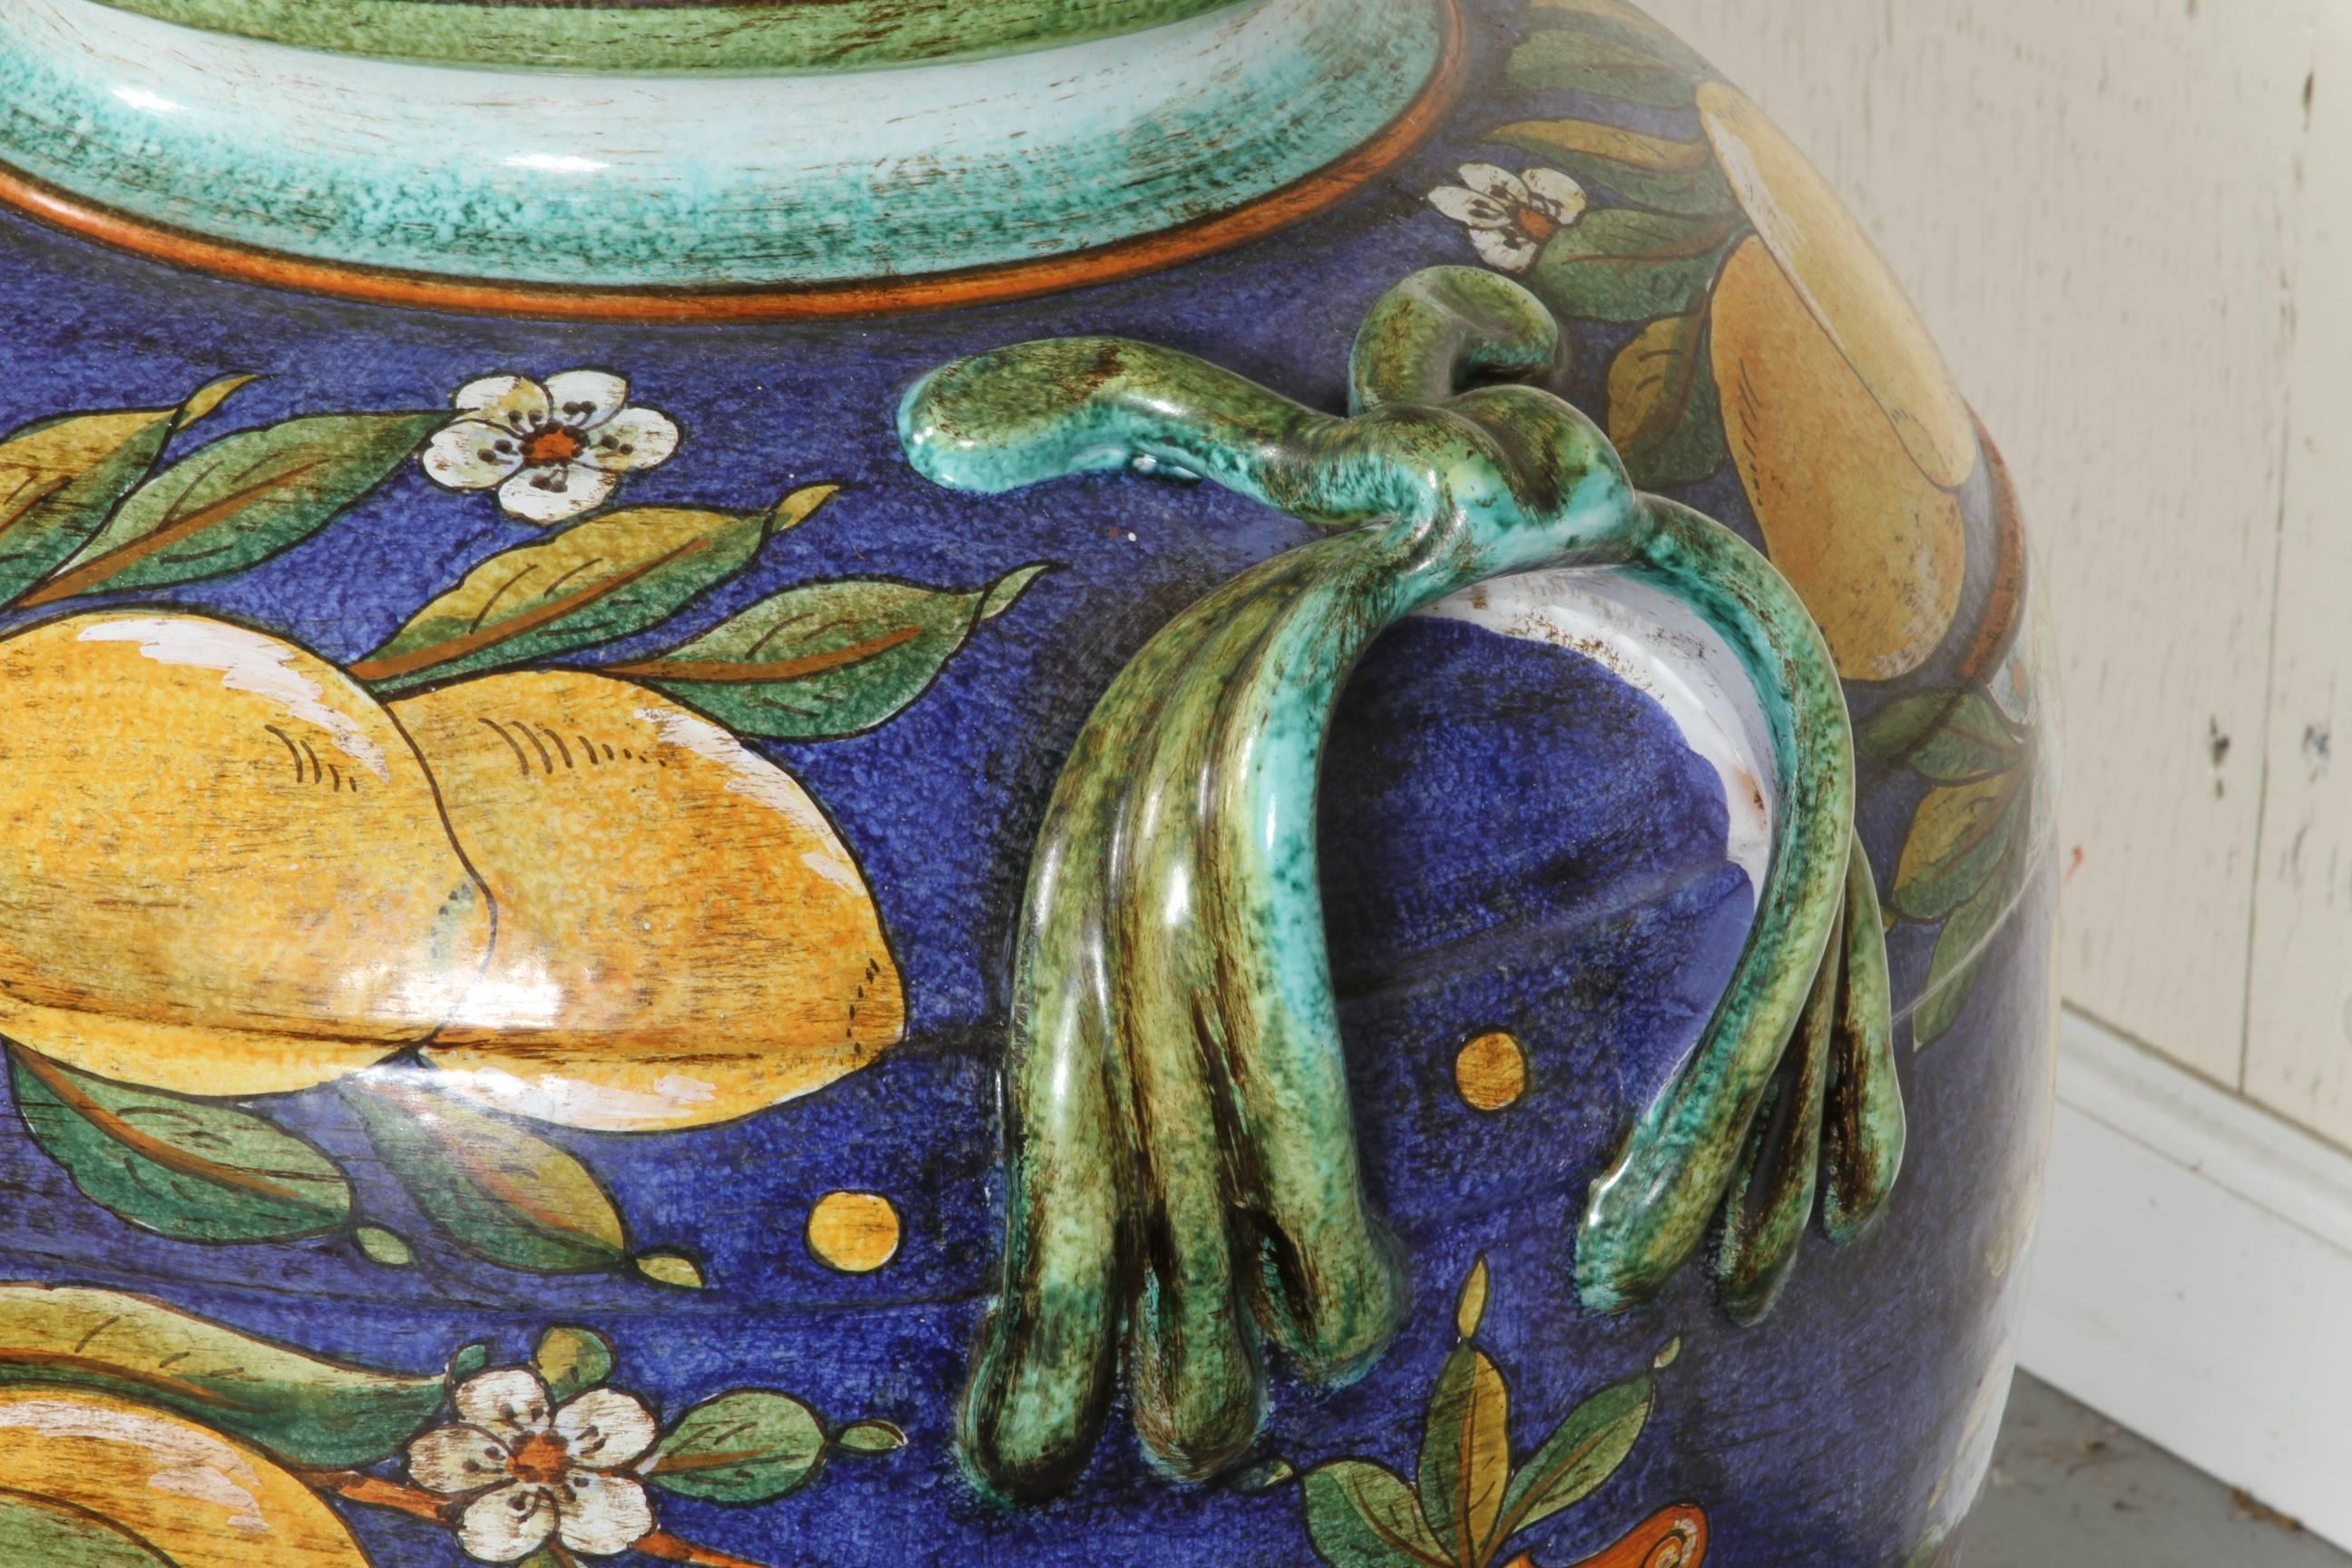 A large and very decorative hand-painted urn from Ravello, Italy. Very good condition with bold and vibrant color.